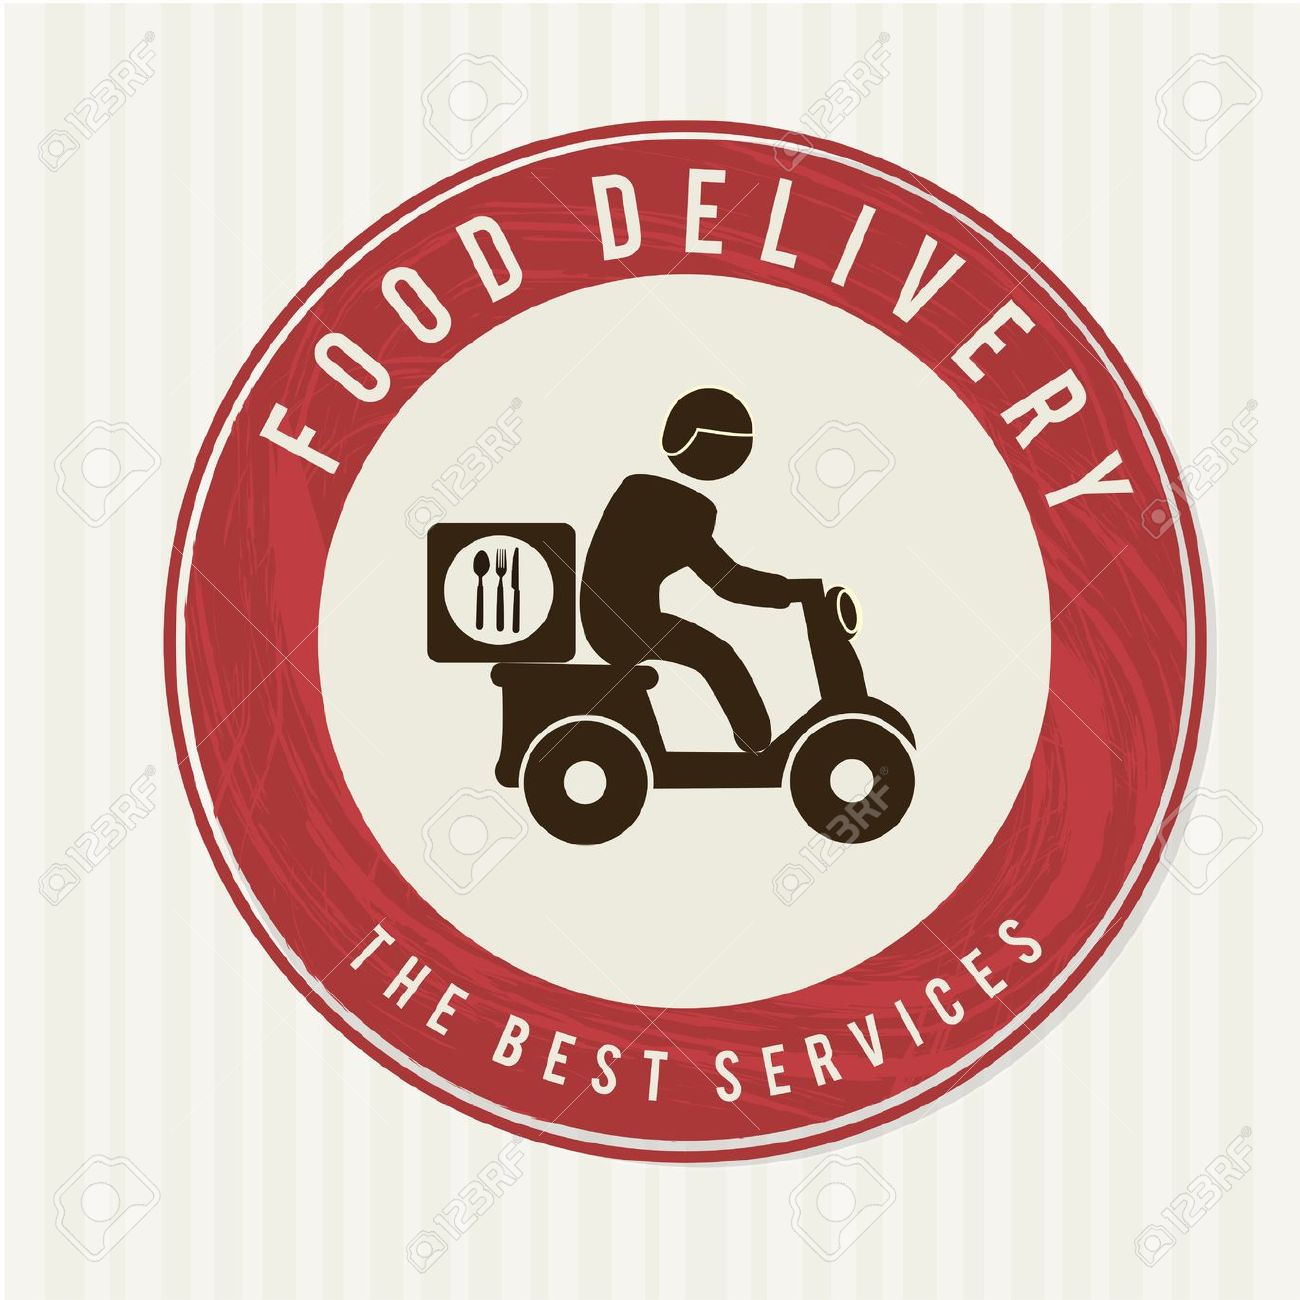 Sijin Gopinathan on Twitter: Delivery Icon https://t.co 